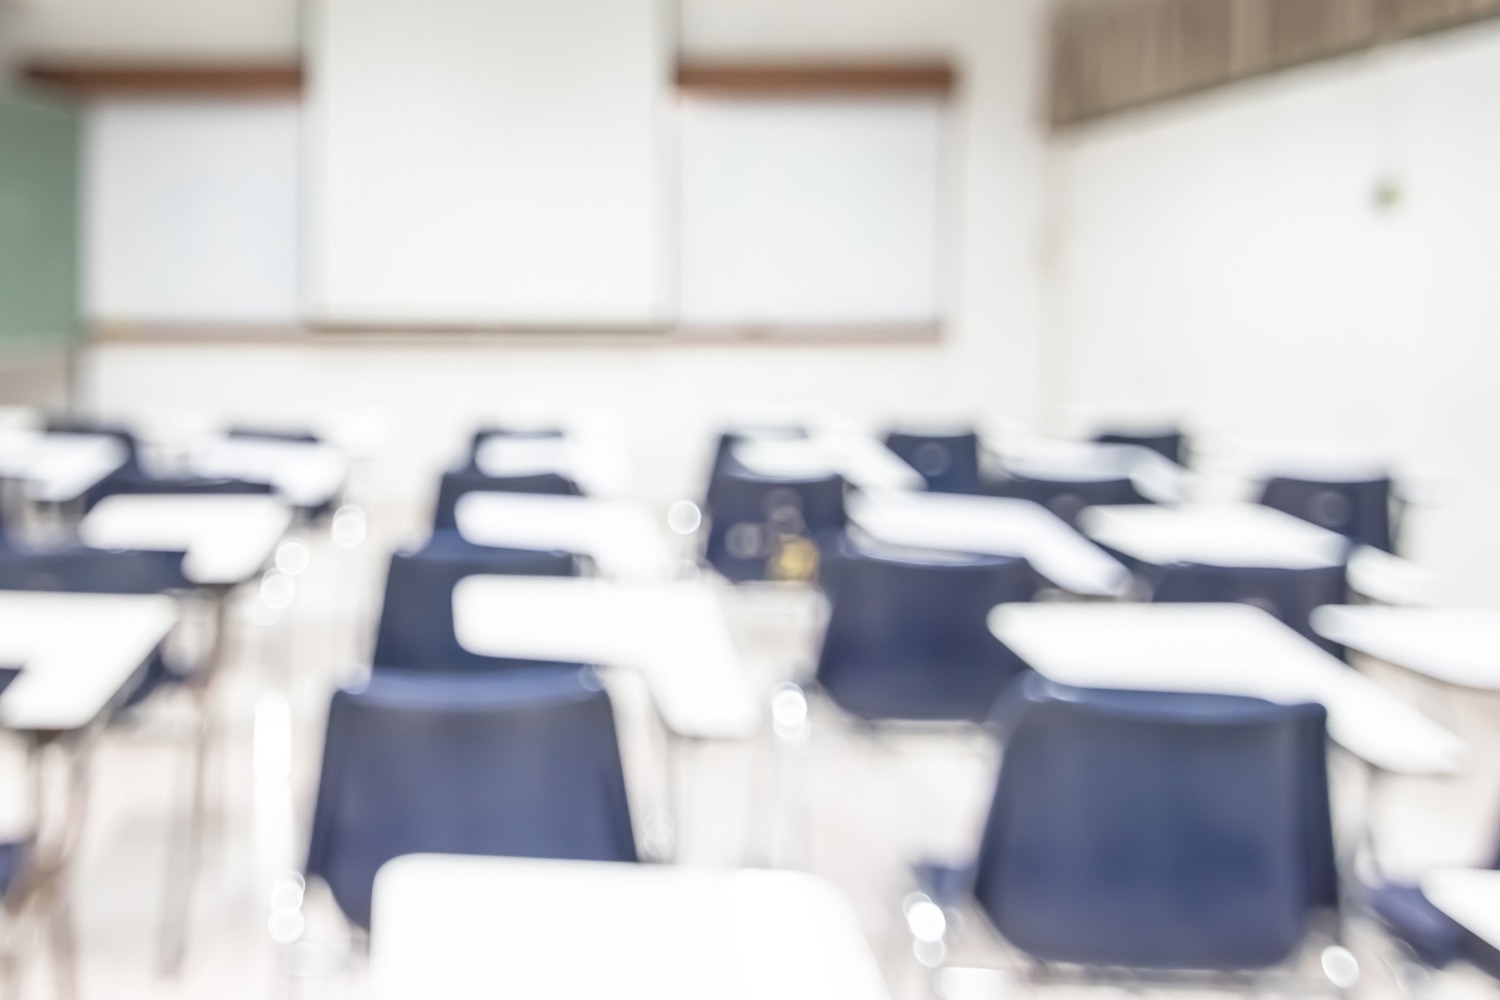 Blur Classroom Education Background Empty School Class Lecture Room Interior View With No Teacher Nor Student Public Service Association